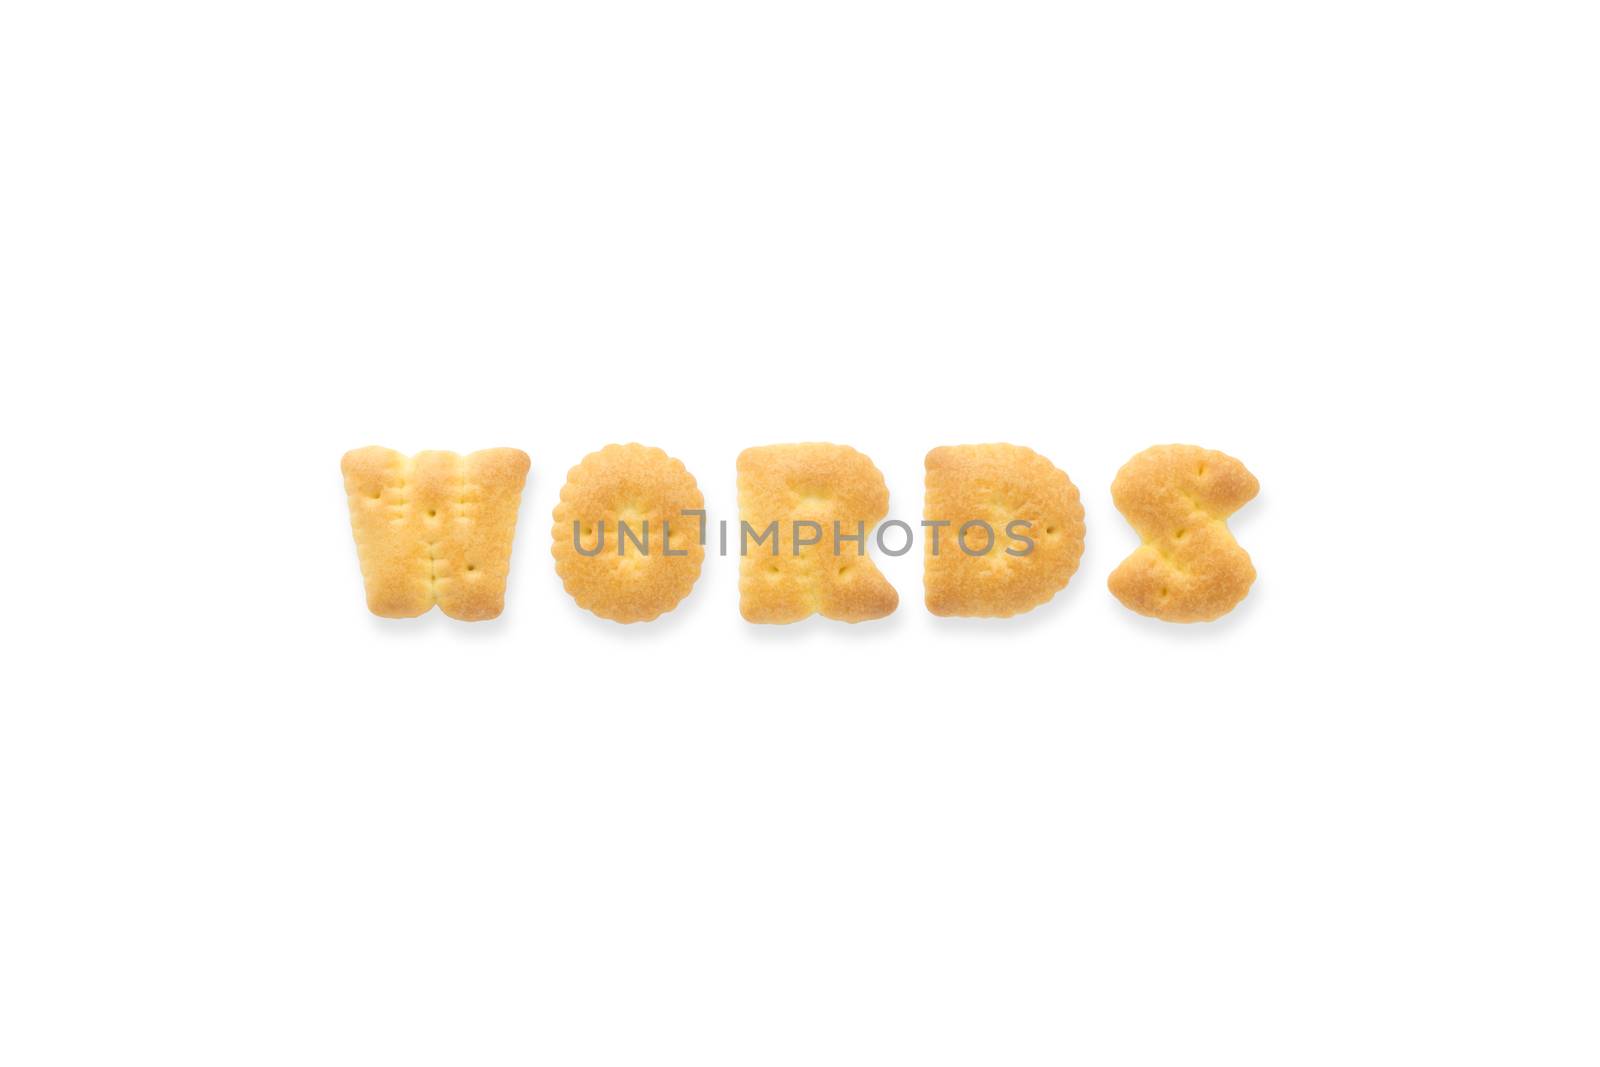 Collage of the capital letters word WORDS. Alphabet cookie biscuits isolated on white background